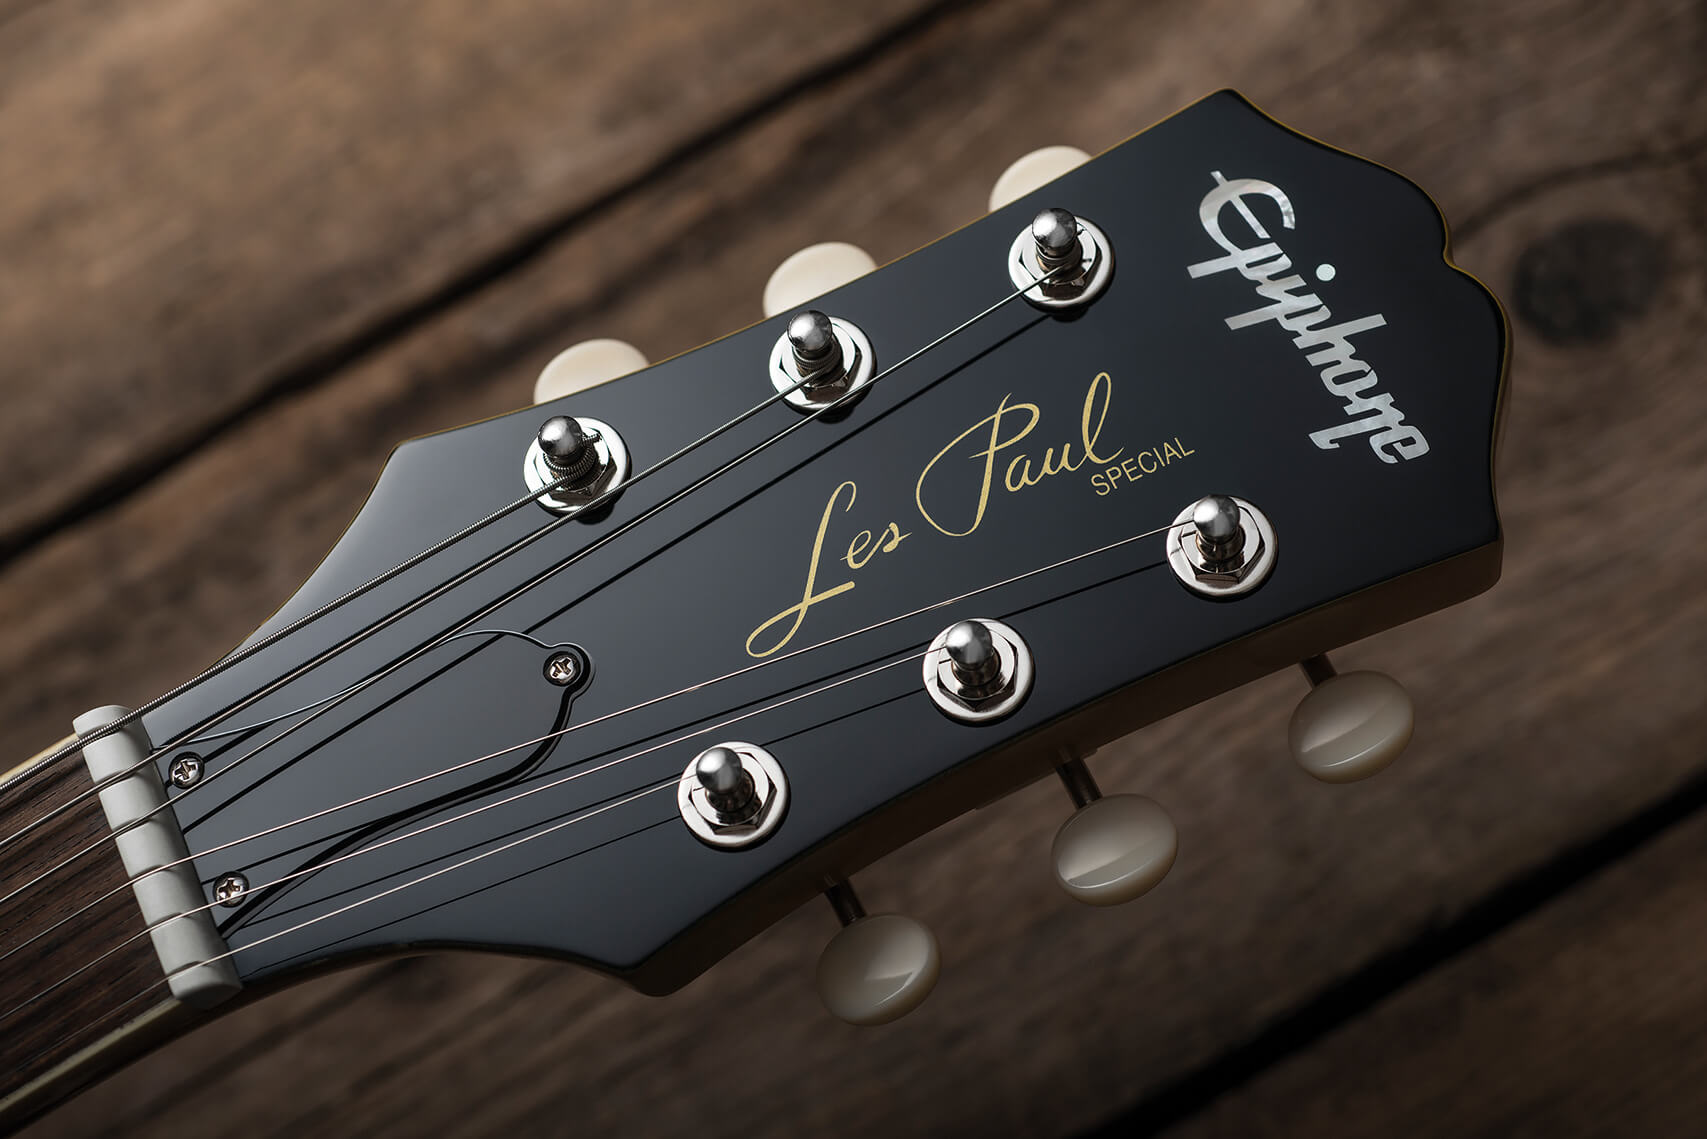 Epiphone Les Paul Special (Headstock)